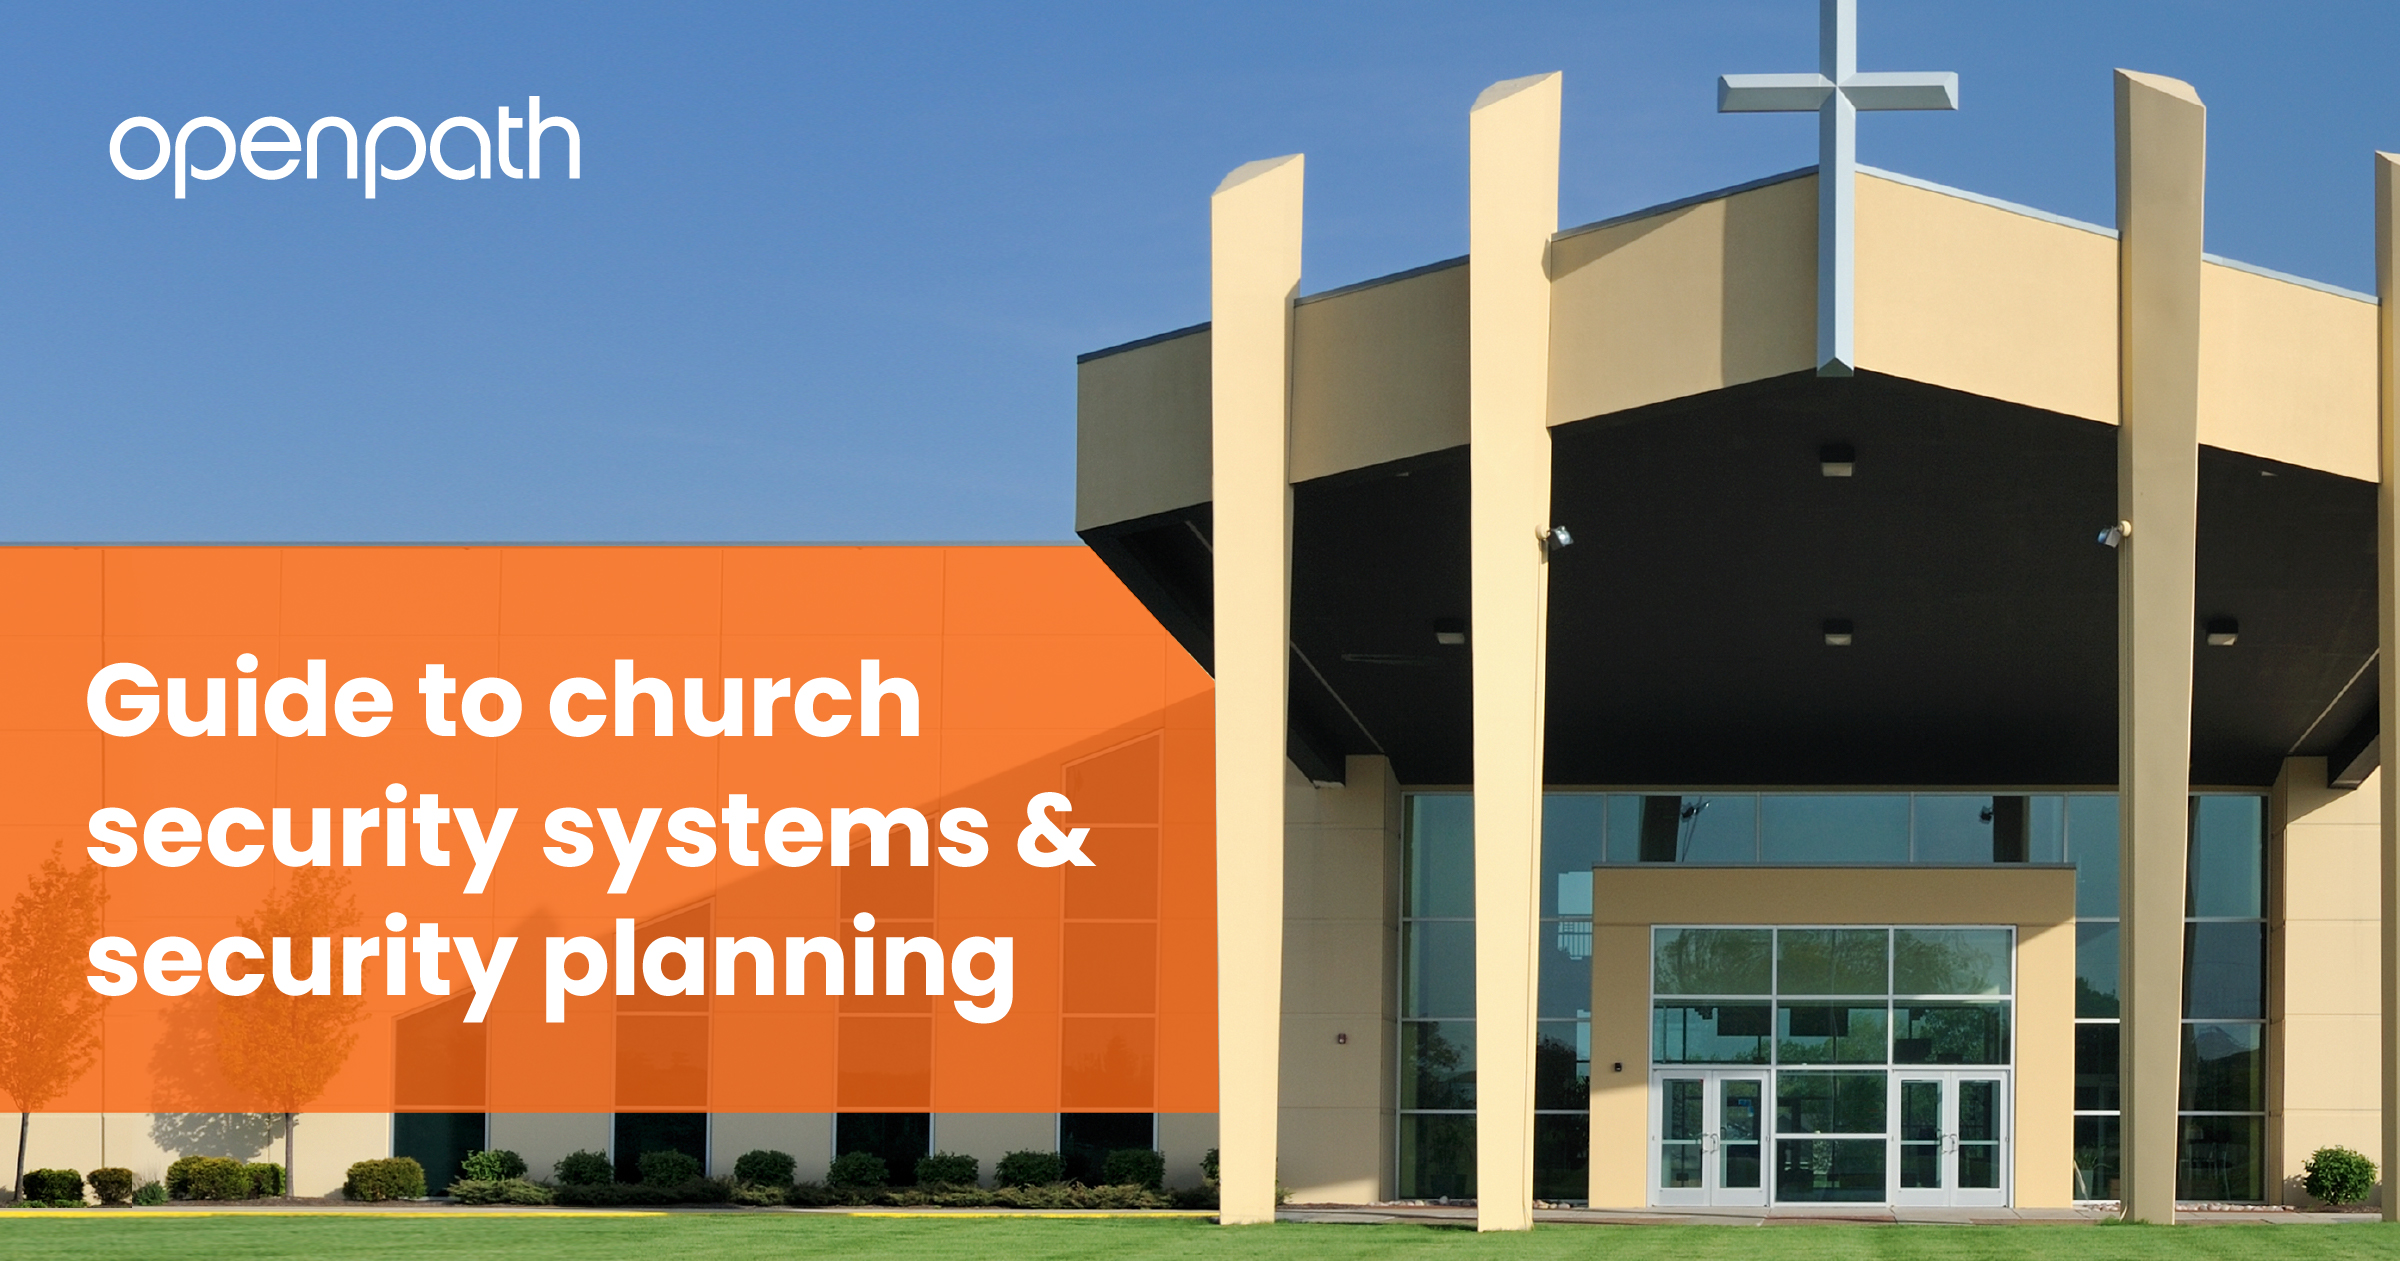 Church Security and Safety: Plans Procedures and Systems